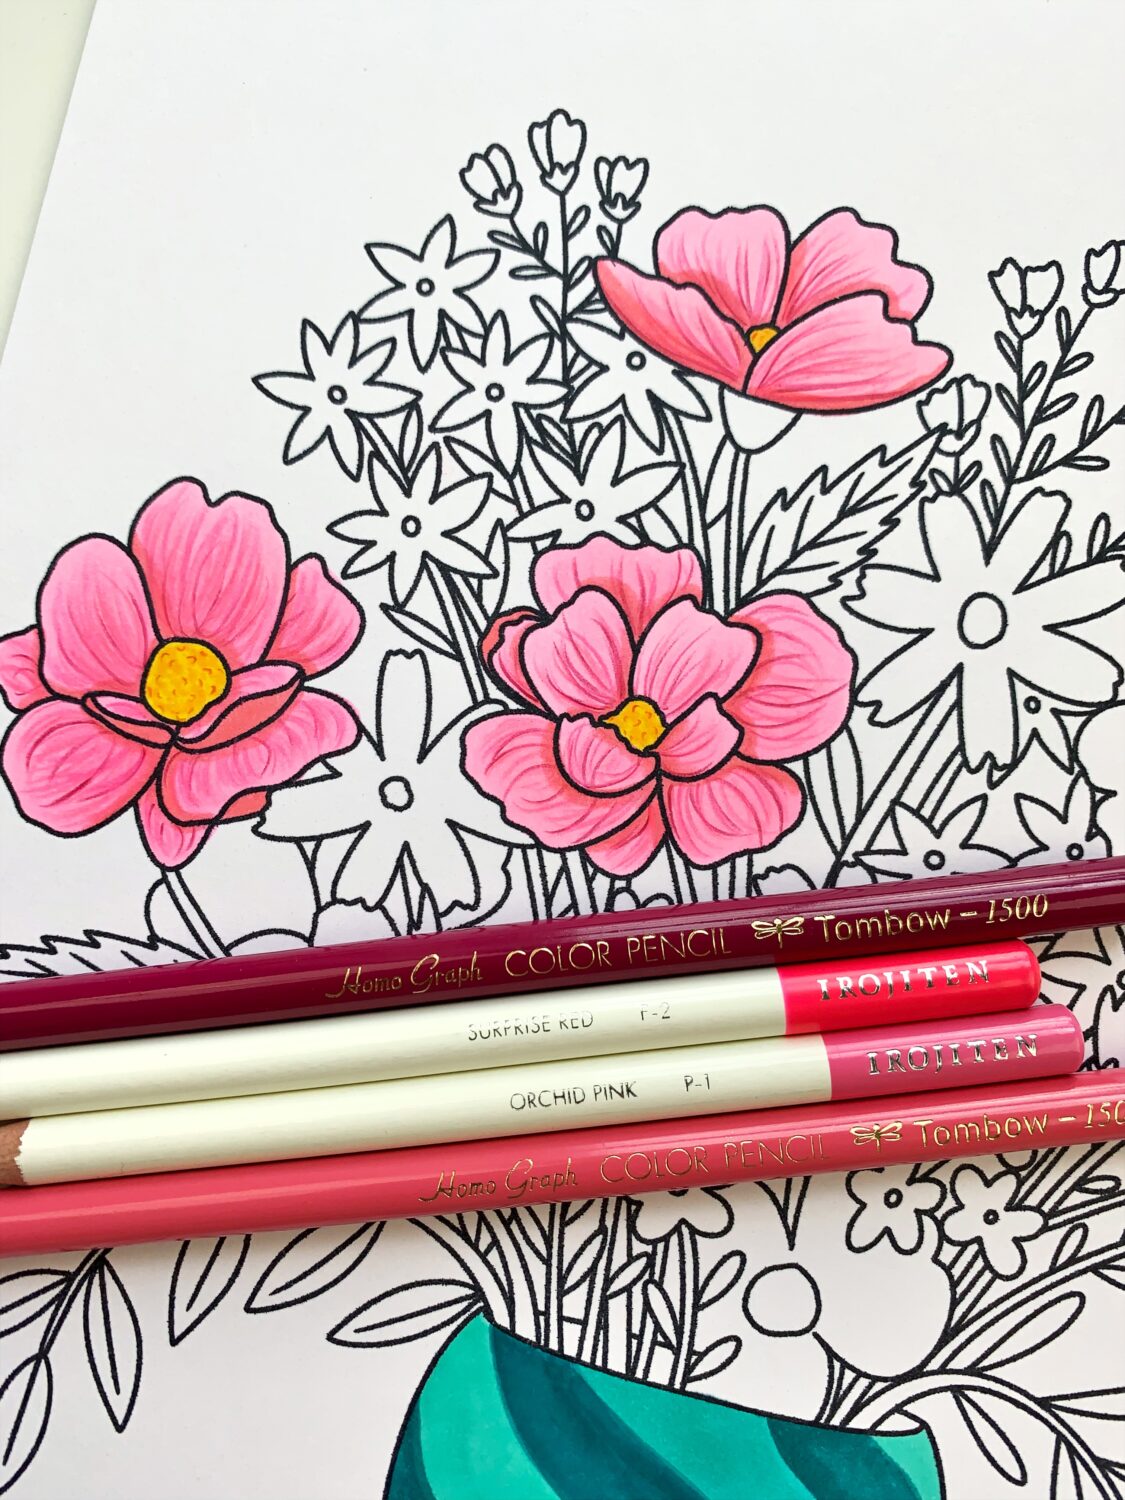 Gorgeous Free Coloring Pages for Adults and a Chance to Win Tombow